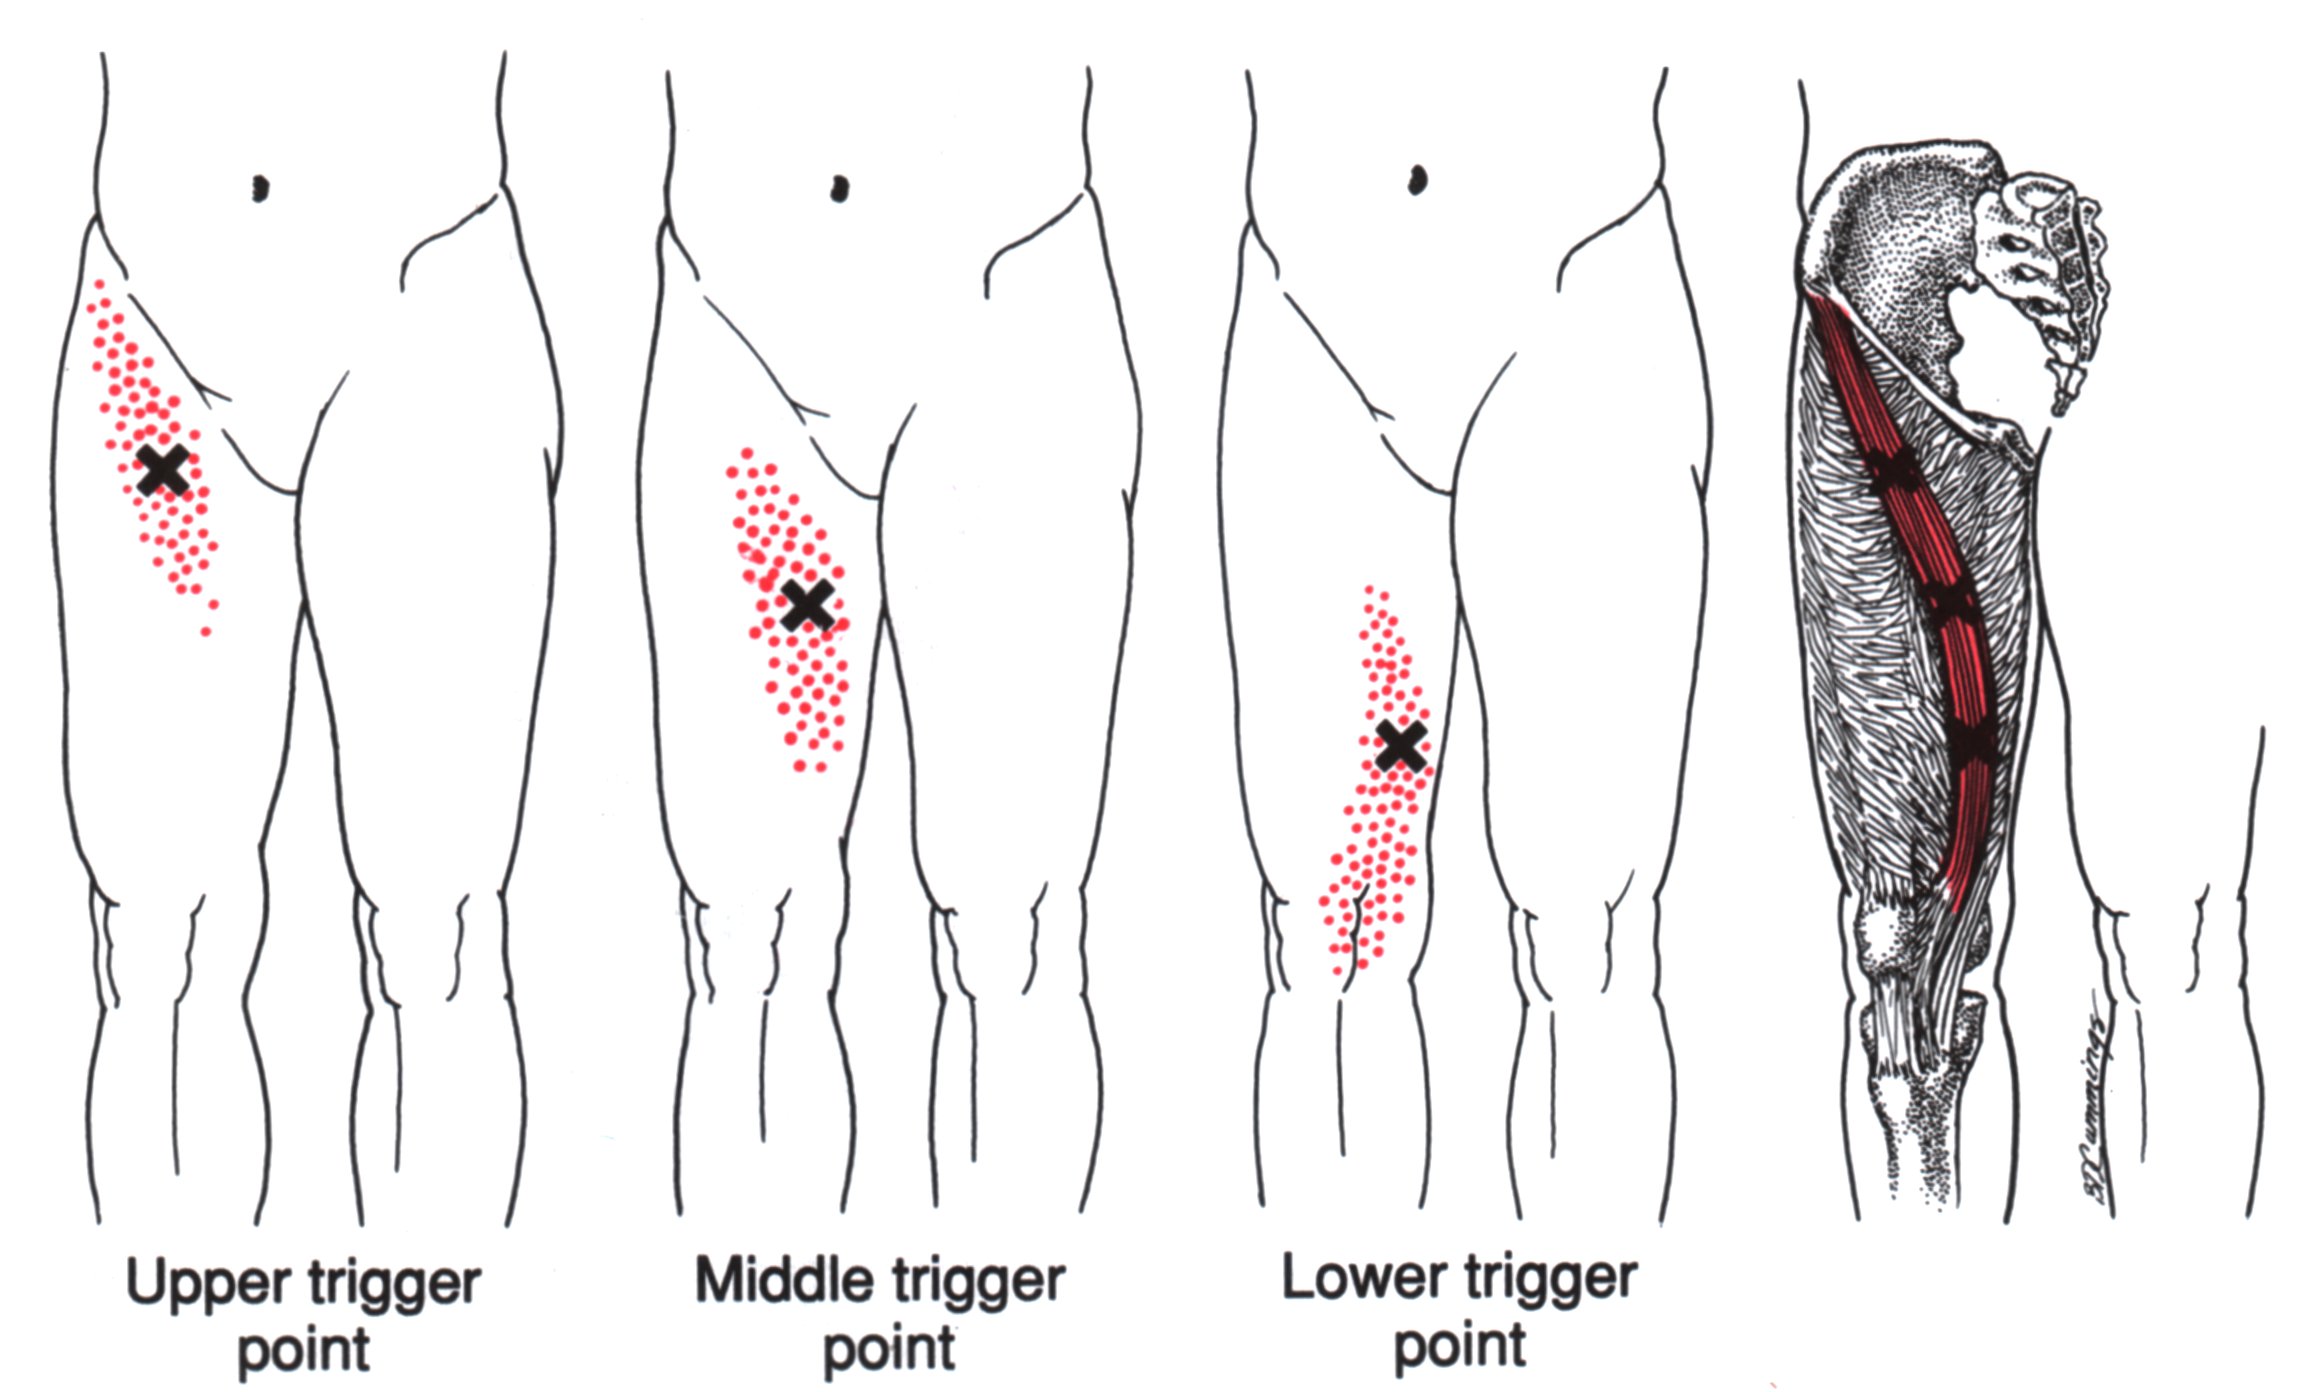 Oberschenkelleitmuskel | The Trigger Point & Referred Pain Guide